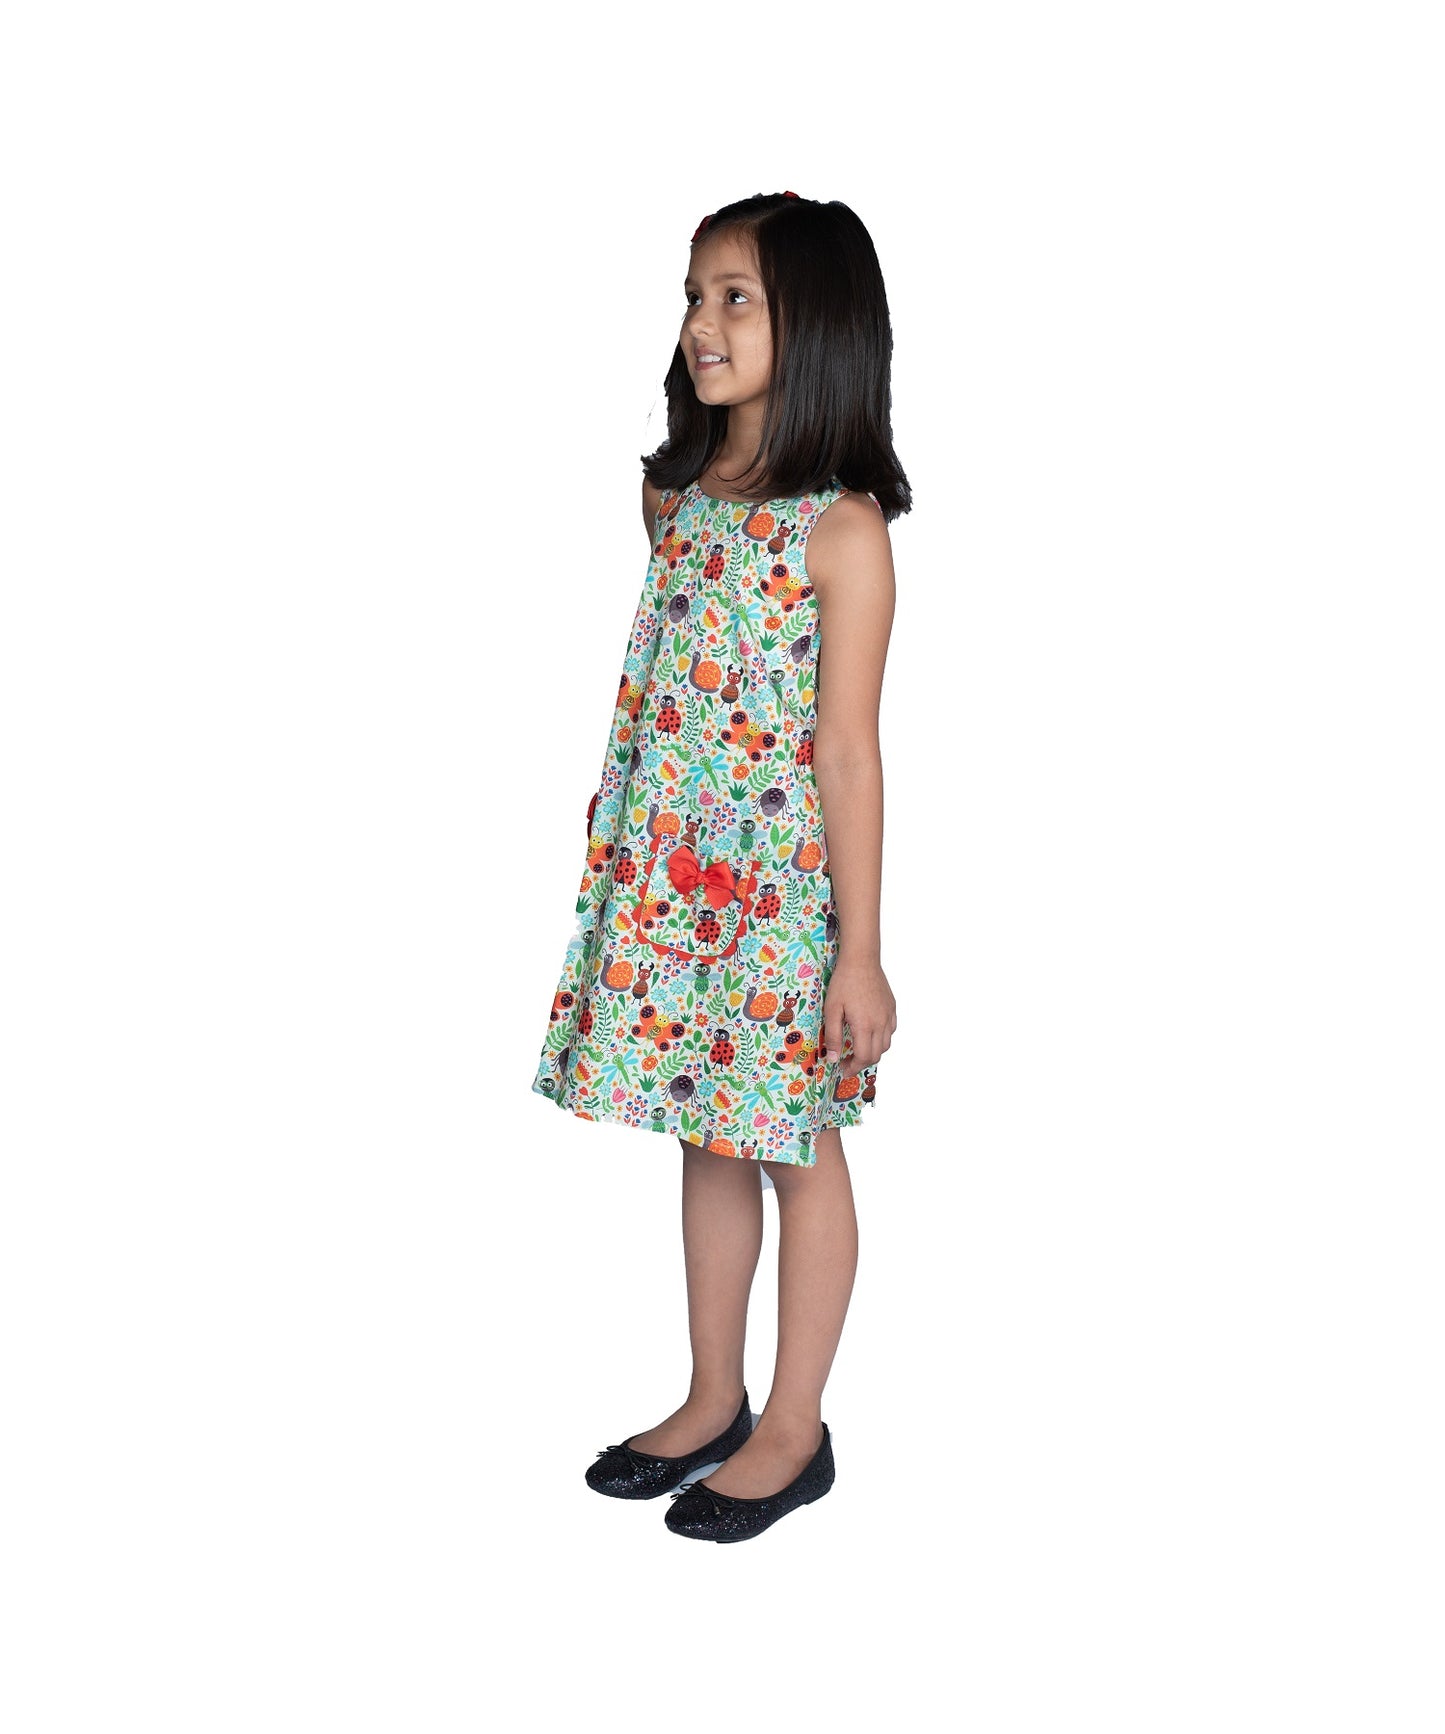 Ladybug Garden Print Shift Dress with Sleeveless sleeves and  Two Pockets